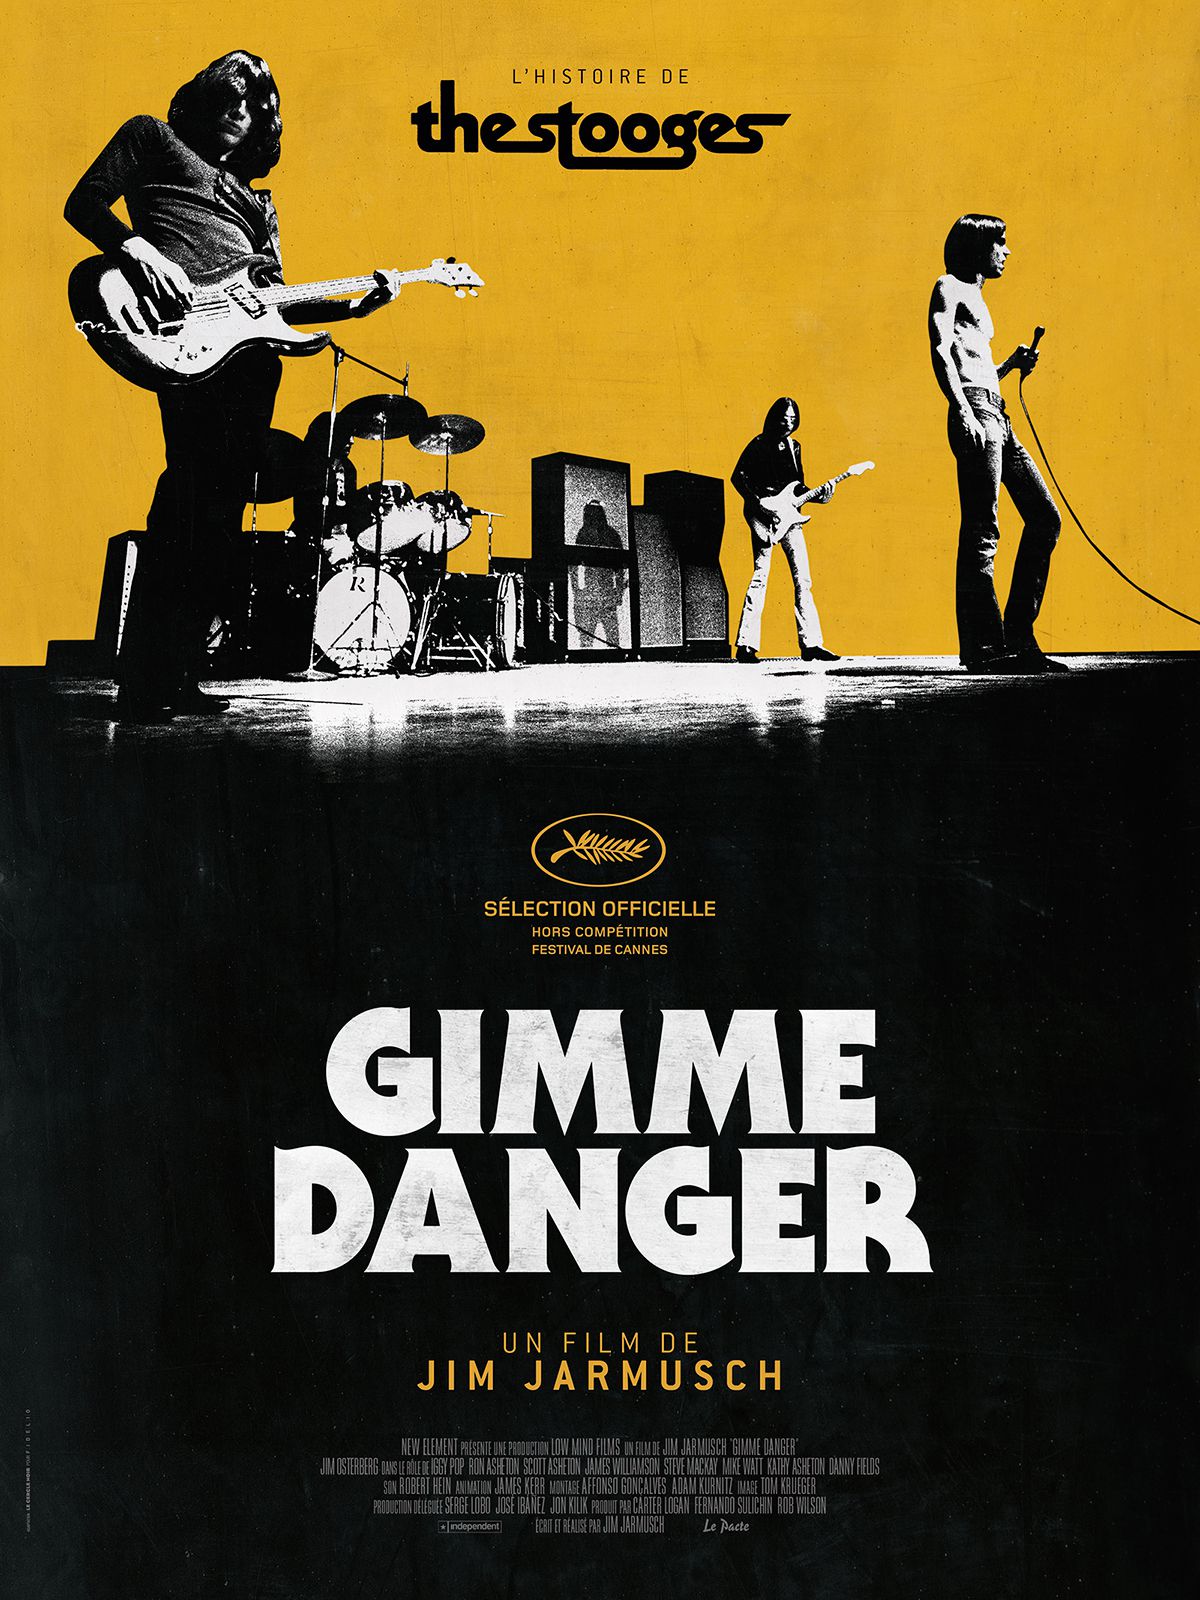 Gimme Danger - Documentaire (2017) streaming VF gratuit complet